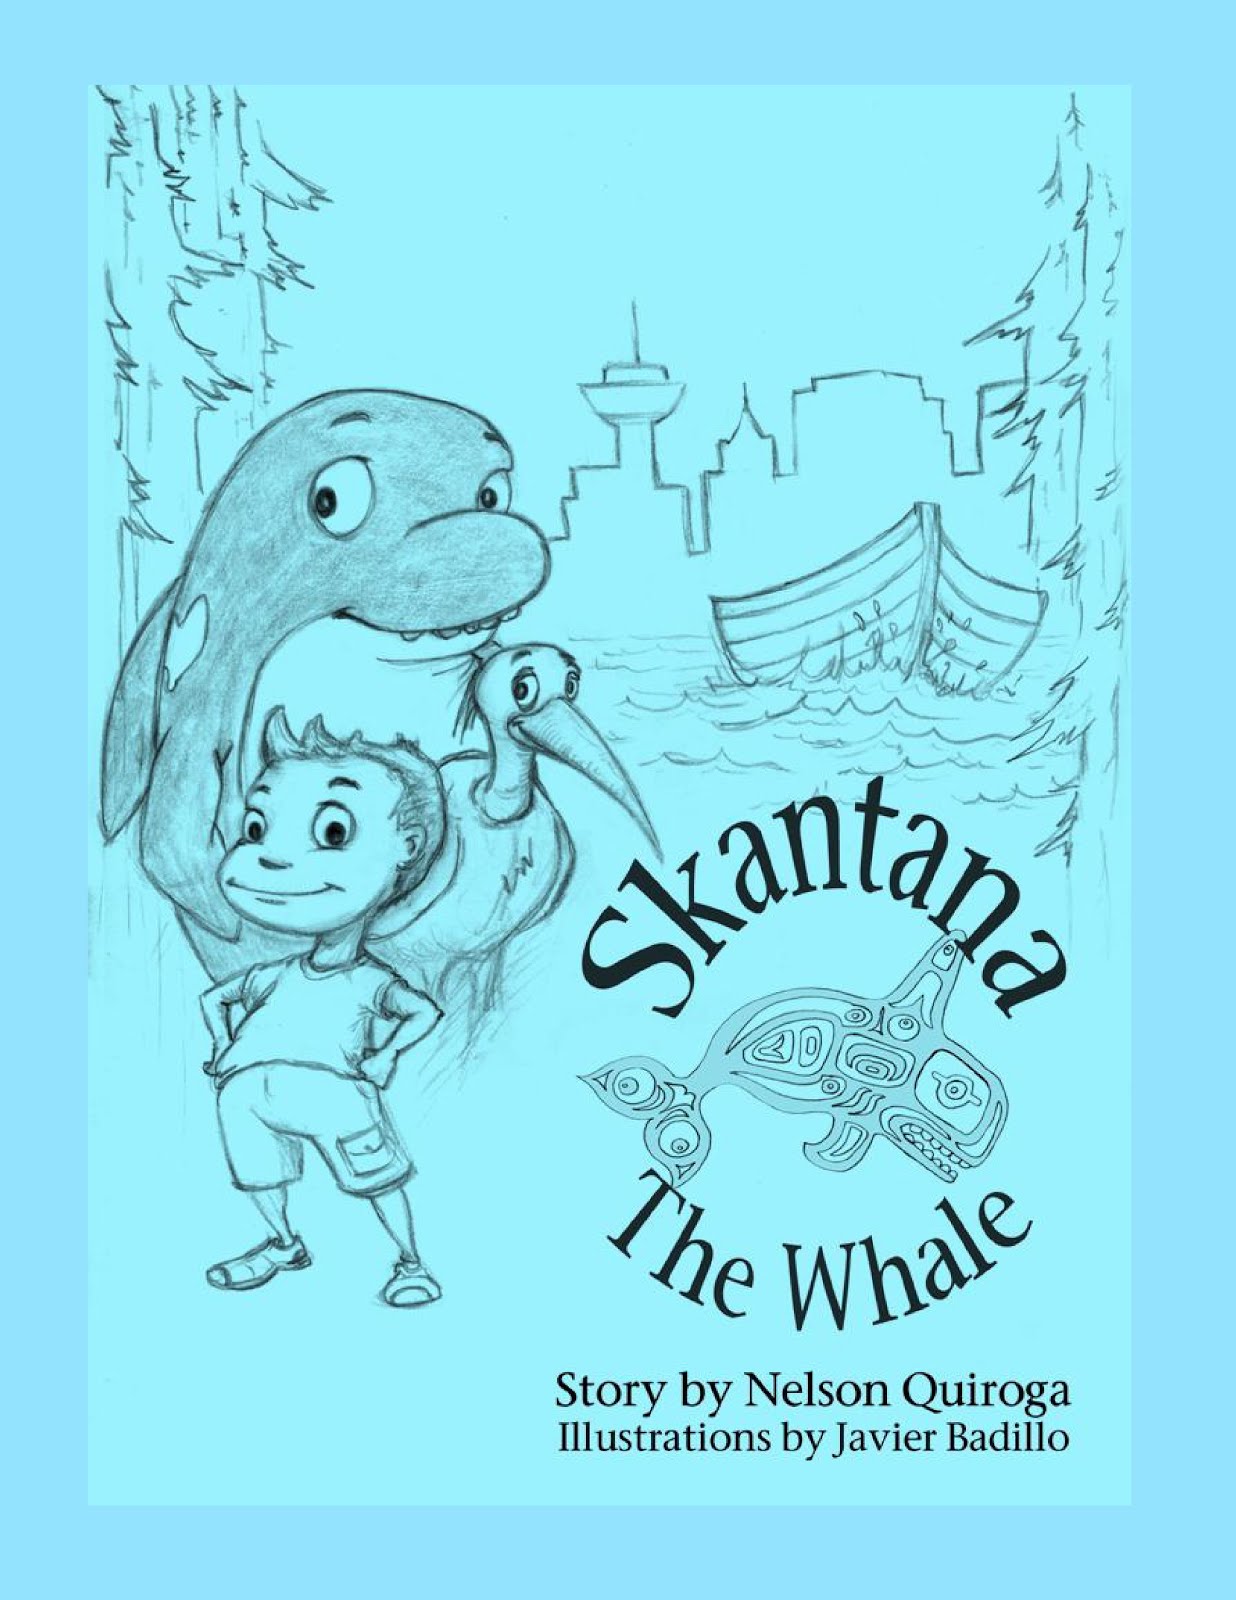 "Skantana The Whale" by Nelson Quiroga available at Amazon Books